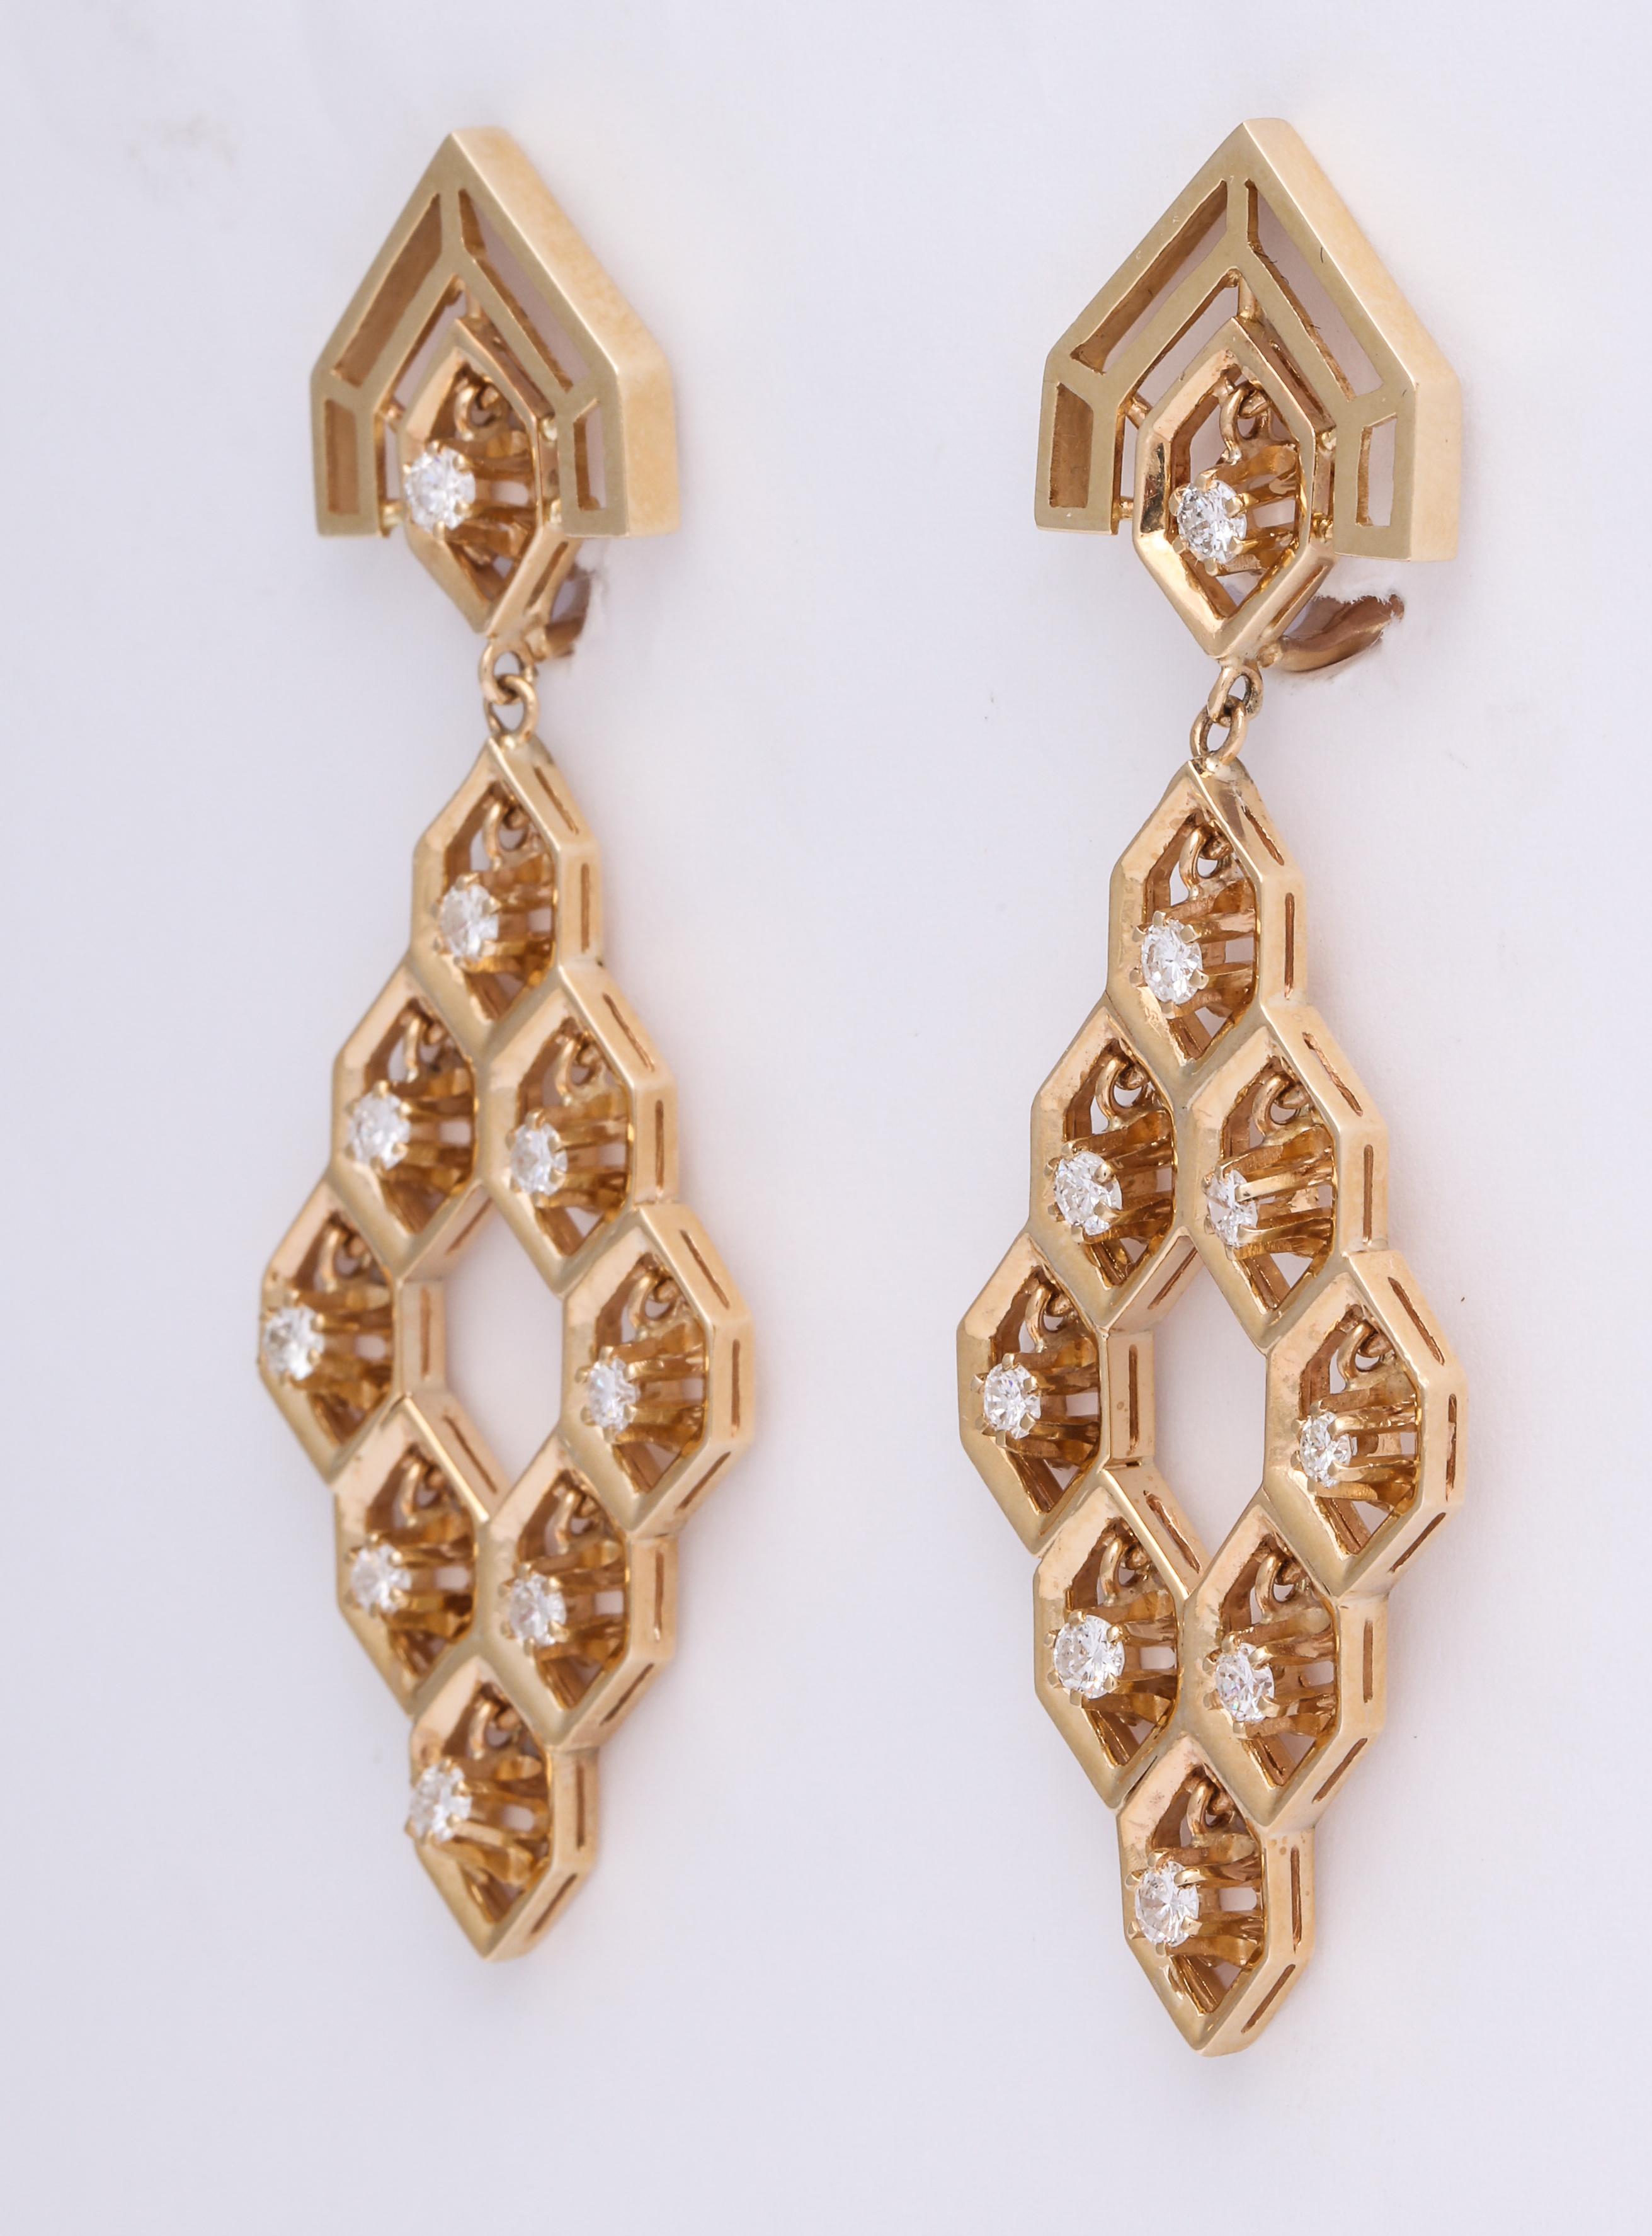 Modernist Dangling Diamonds in a Gold Honeycomb For Sale